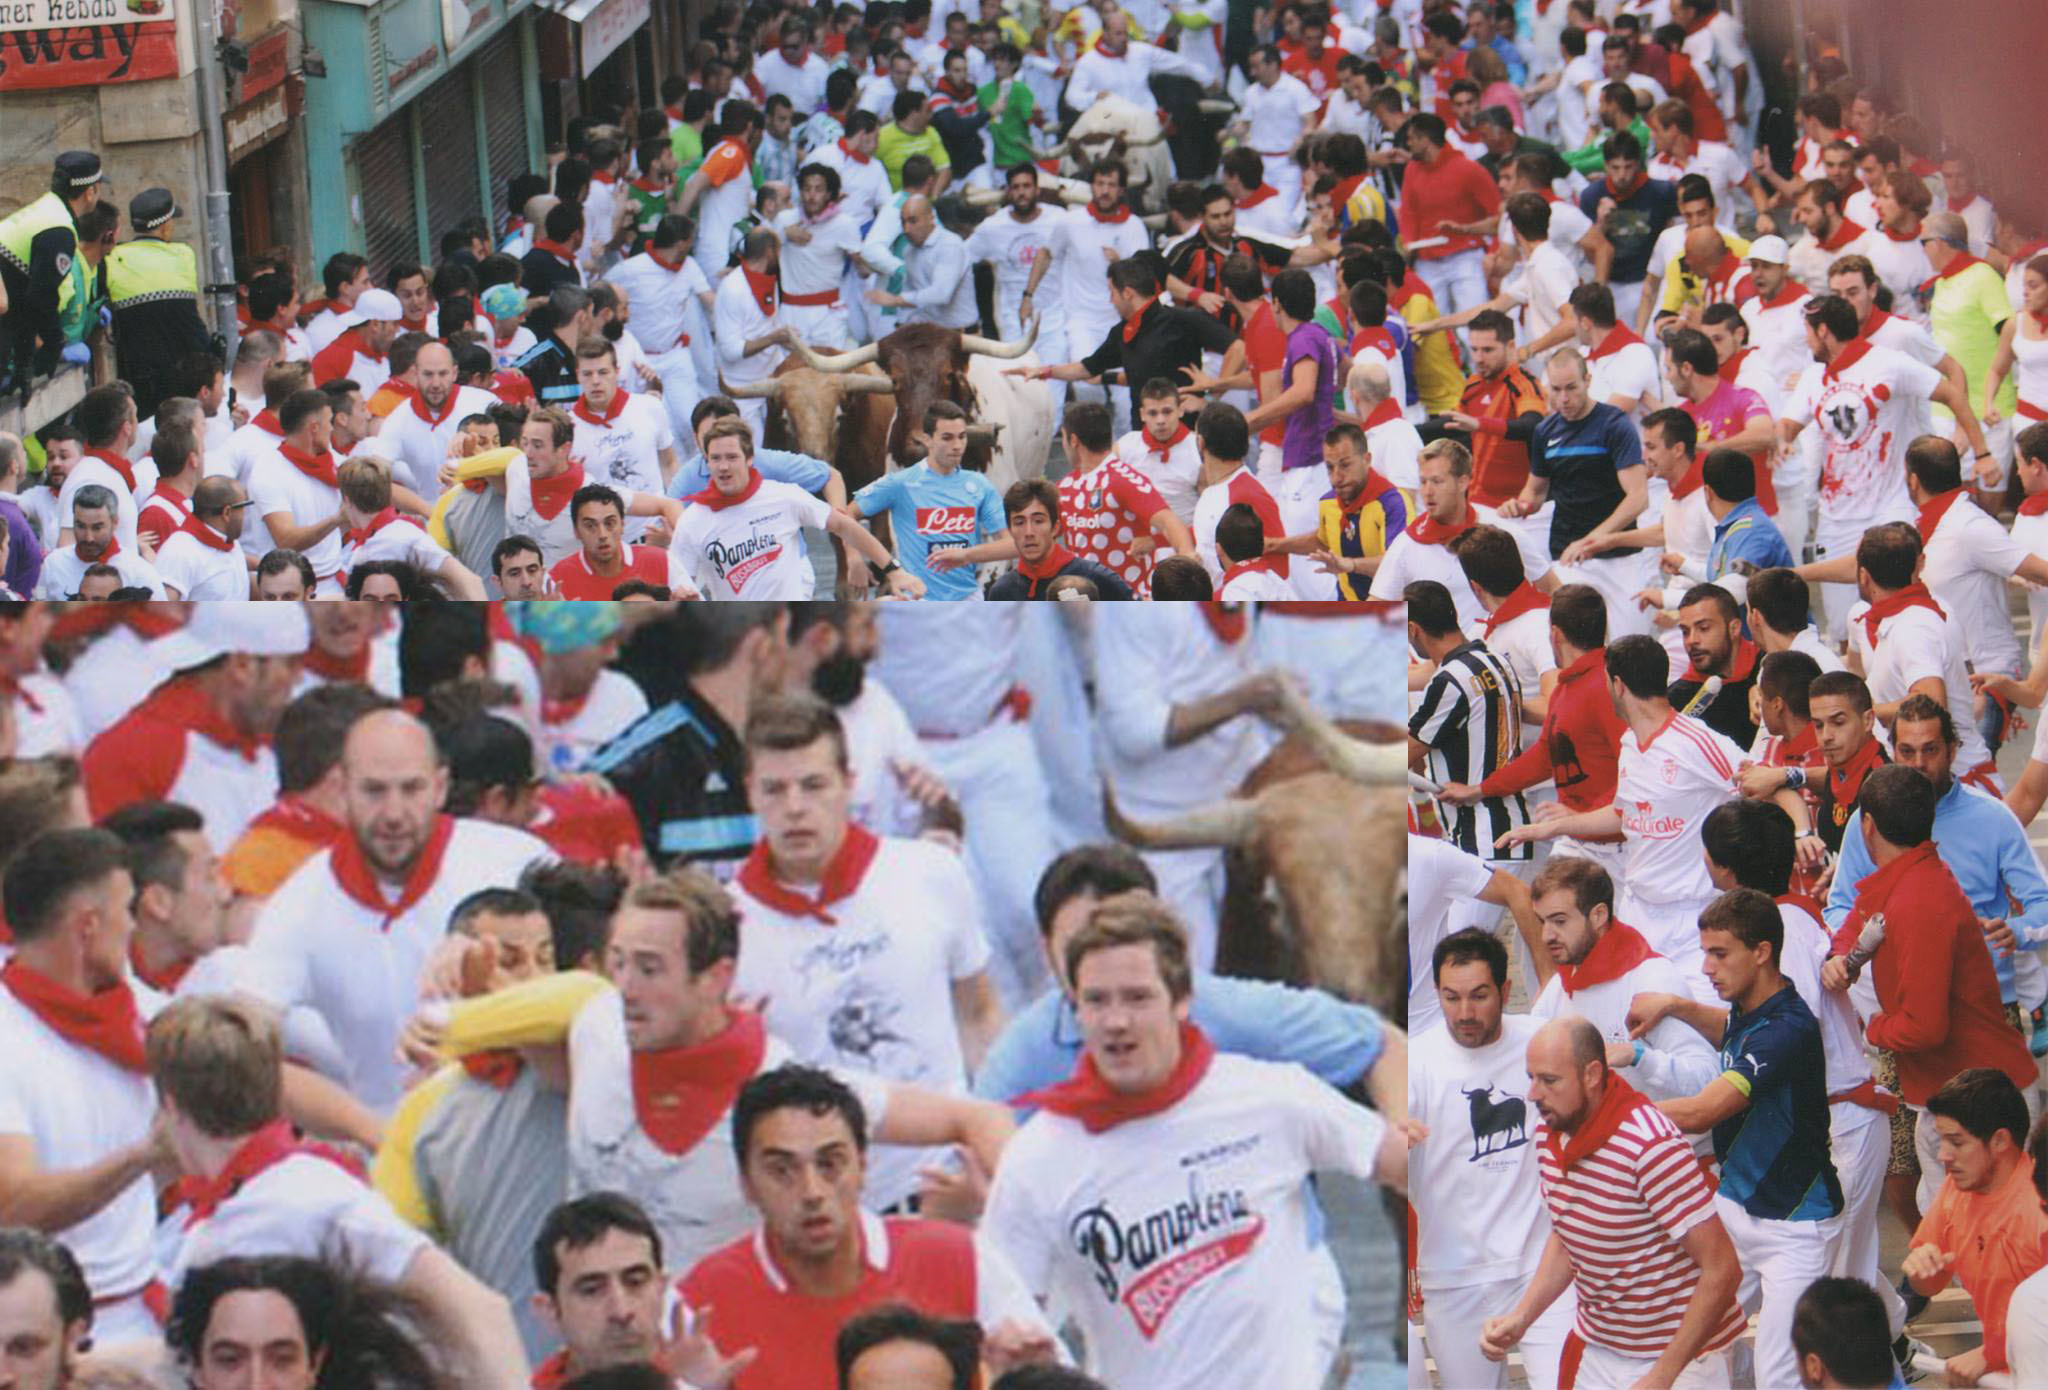 Tom Robertson, pictured, during the running of the bulls at the San Fermin festival following his 1,200-mile cycle from Scotland to Pamplona